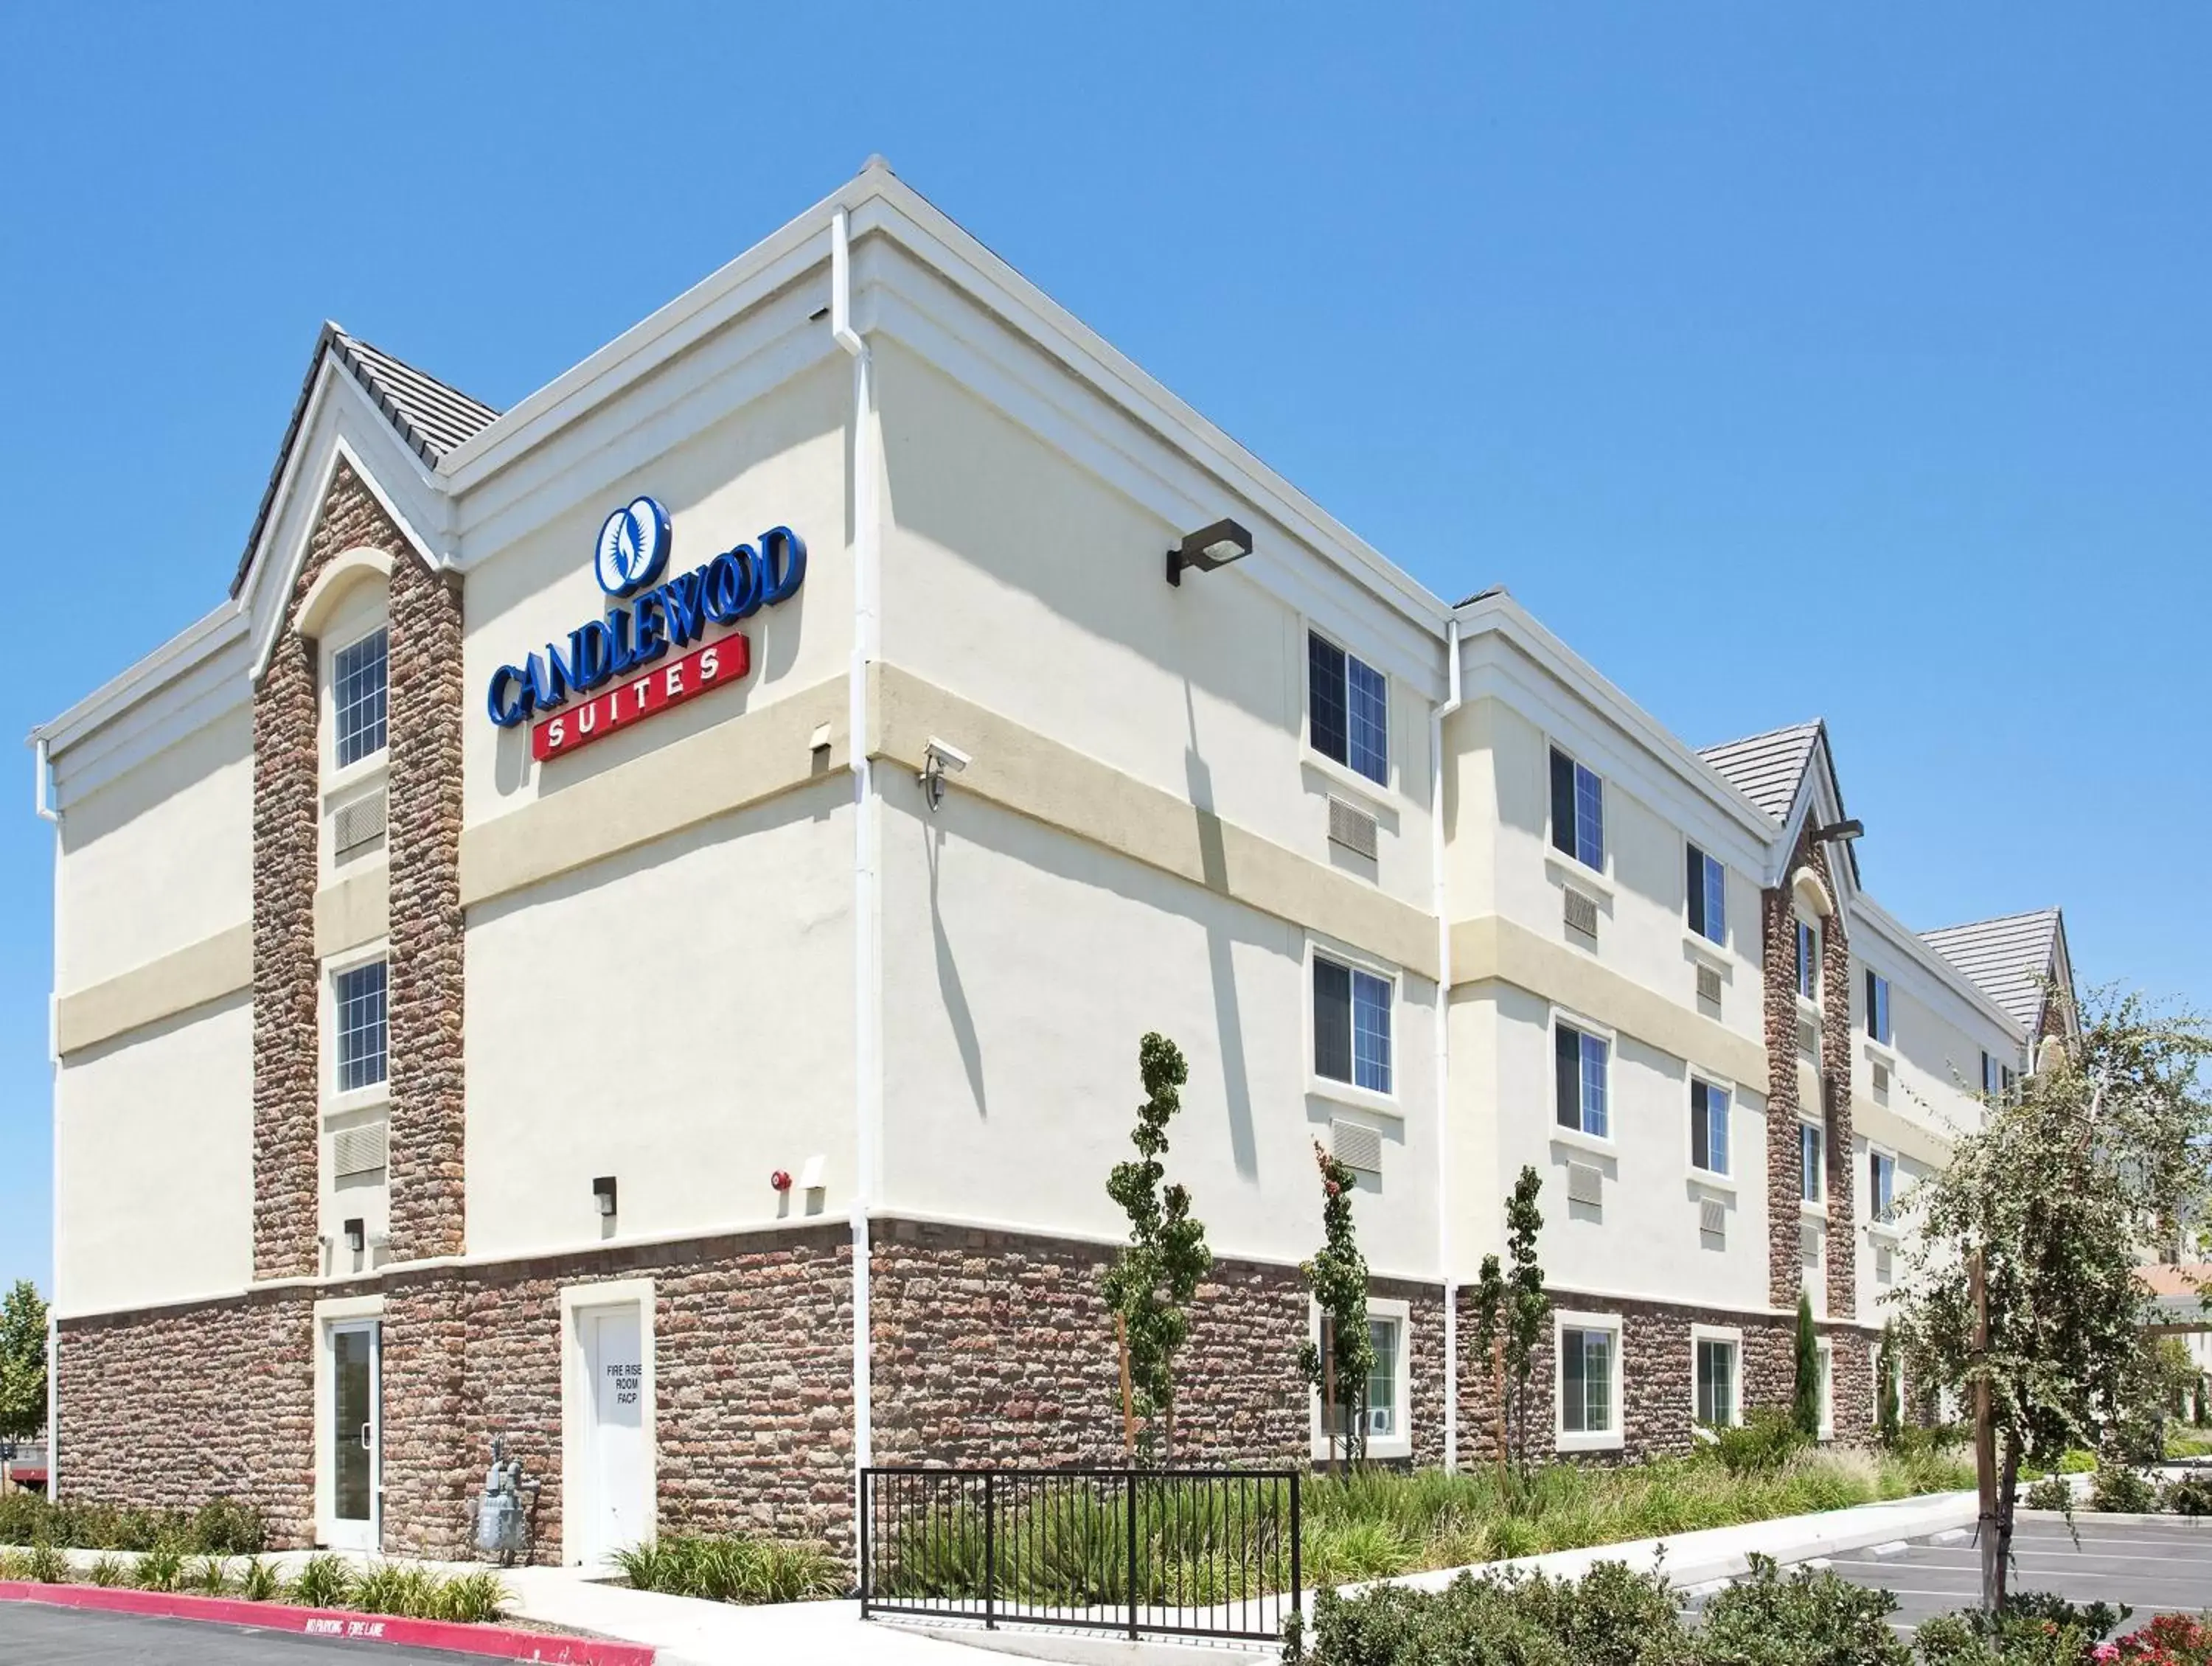 Property Building in Candlewood Suites Turlock, an IHG Hotel